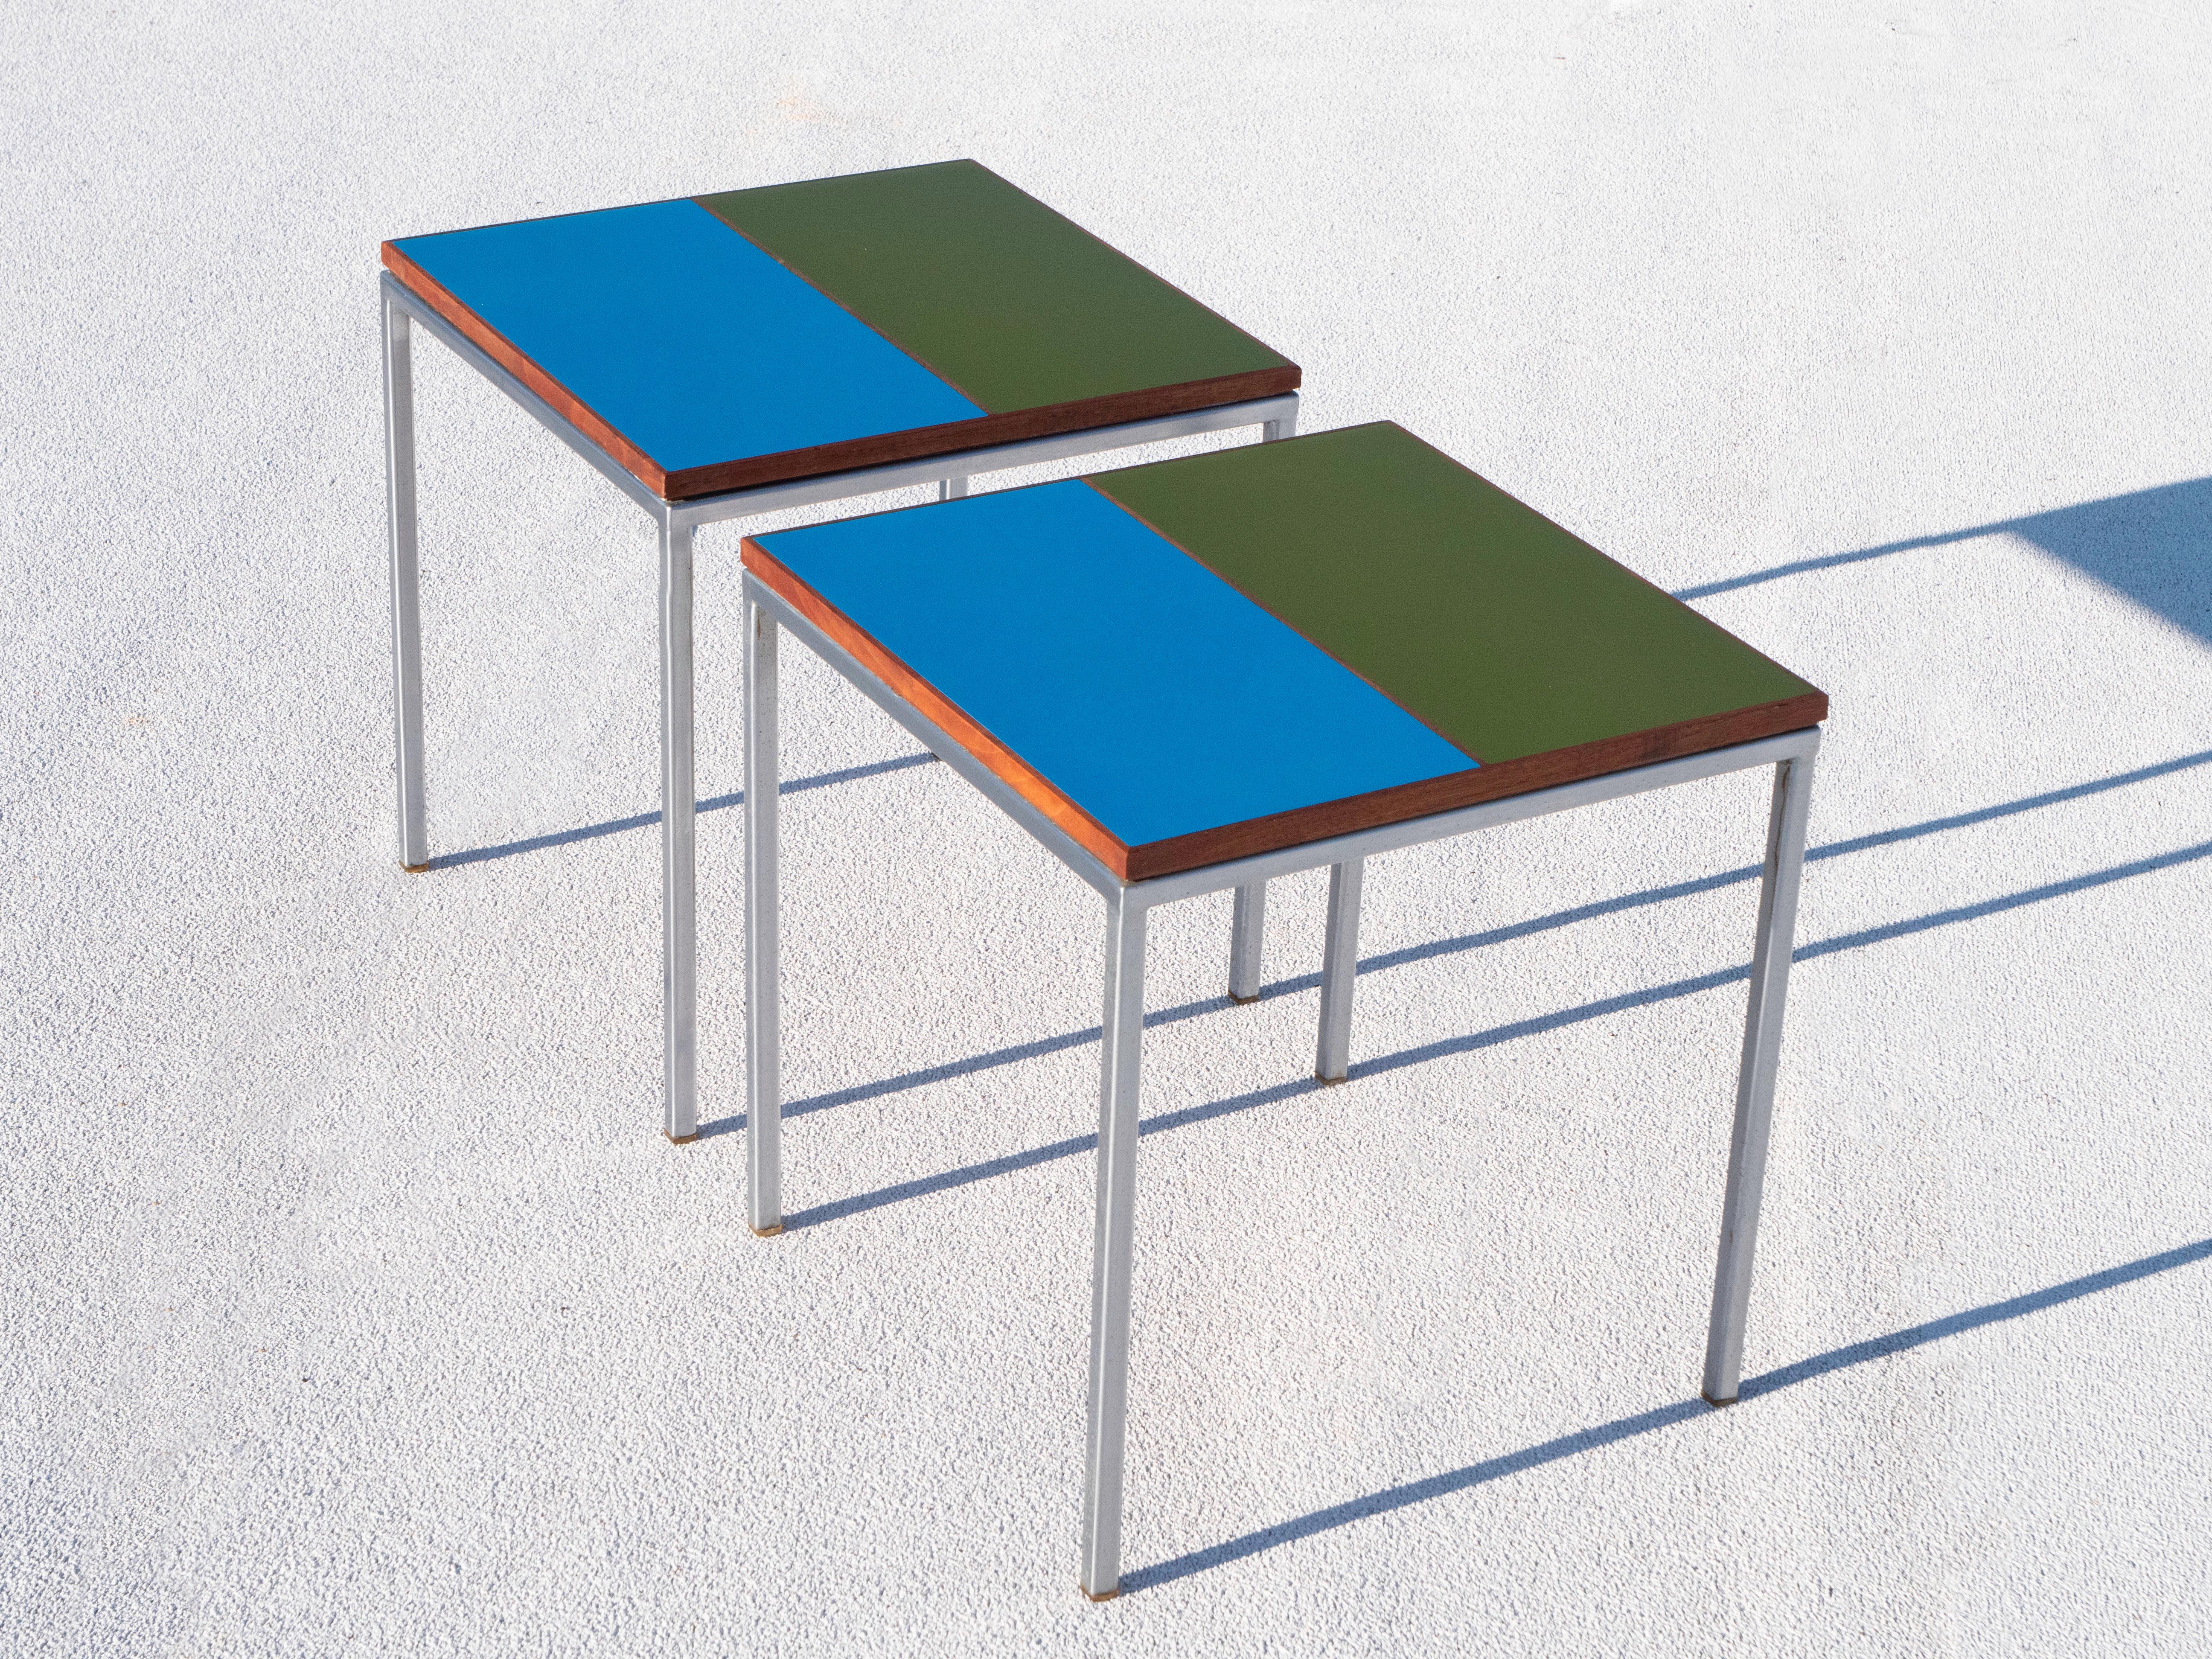 Pair of matching side tables by design team, Howard McNab & Don Savage for California based company Peter Pepper Products.  Design dated 1961.  The tables are in excellent original condition, only showing light wear and patina.  The frame is made of